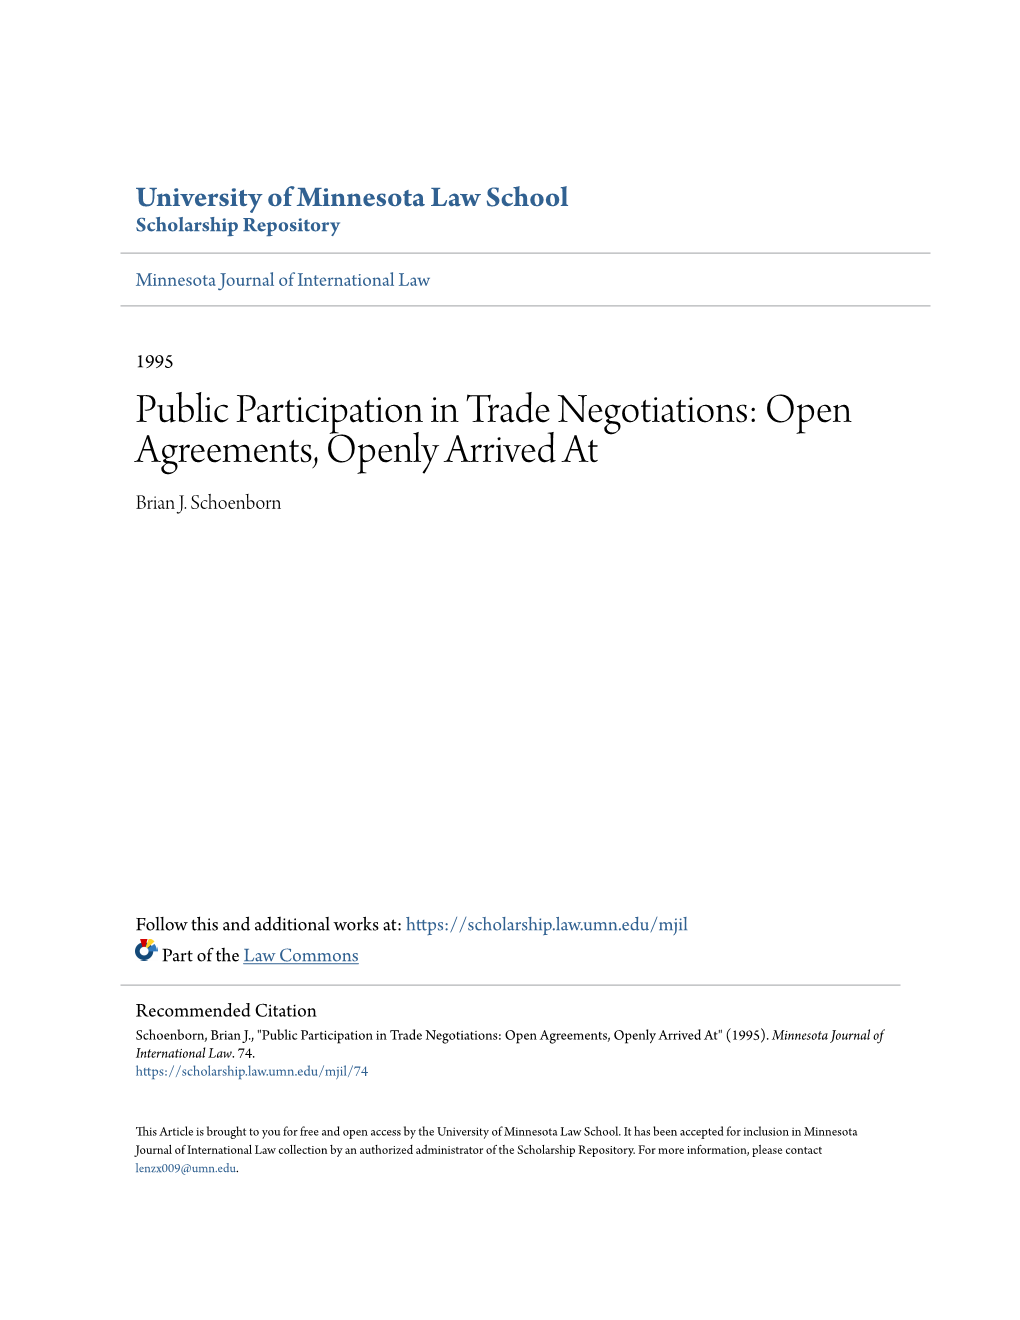 Public Participation in Trade Negotiations: Open Agreements, Openly Arrived at Brian J